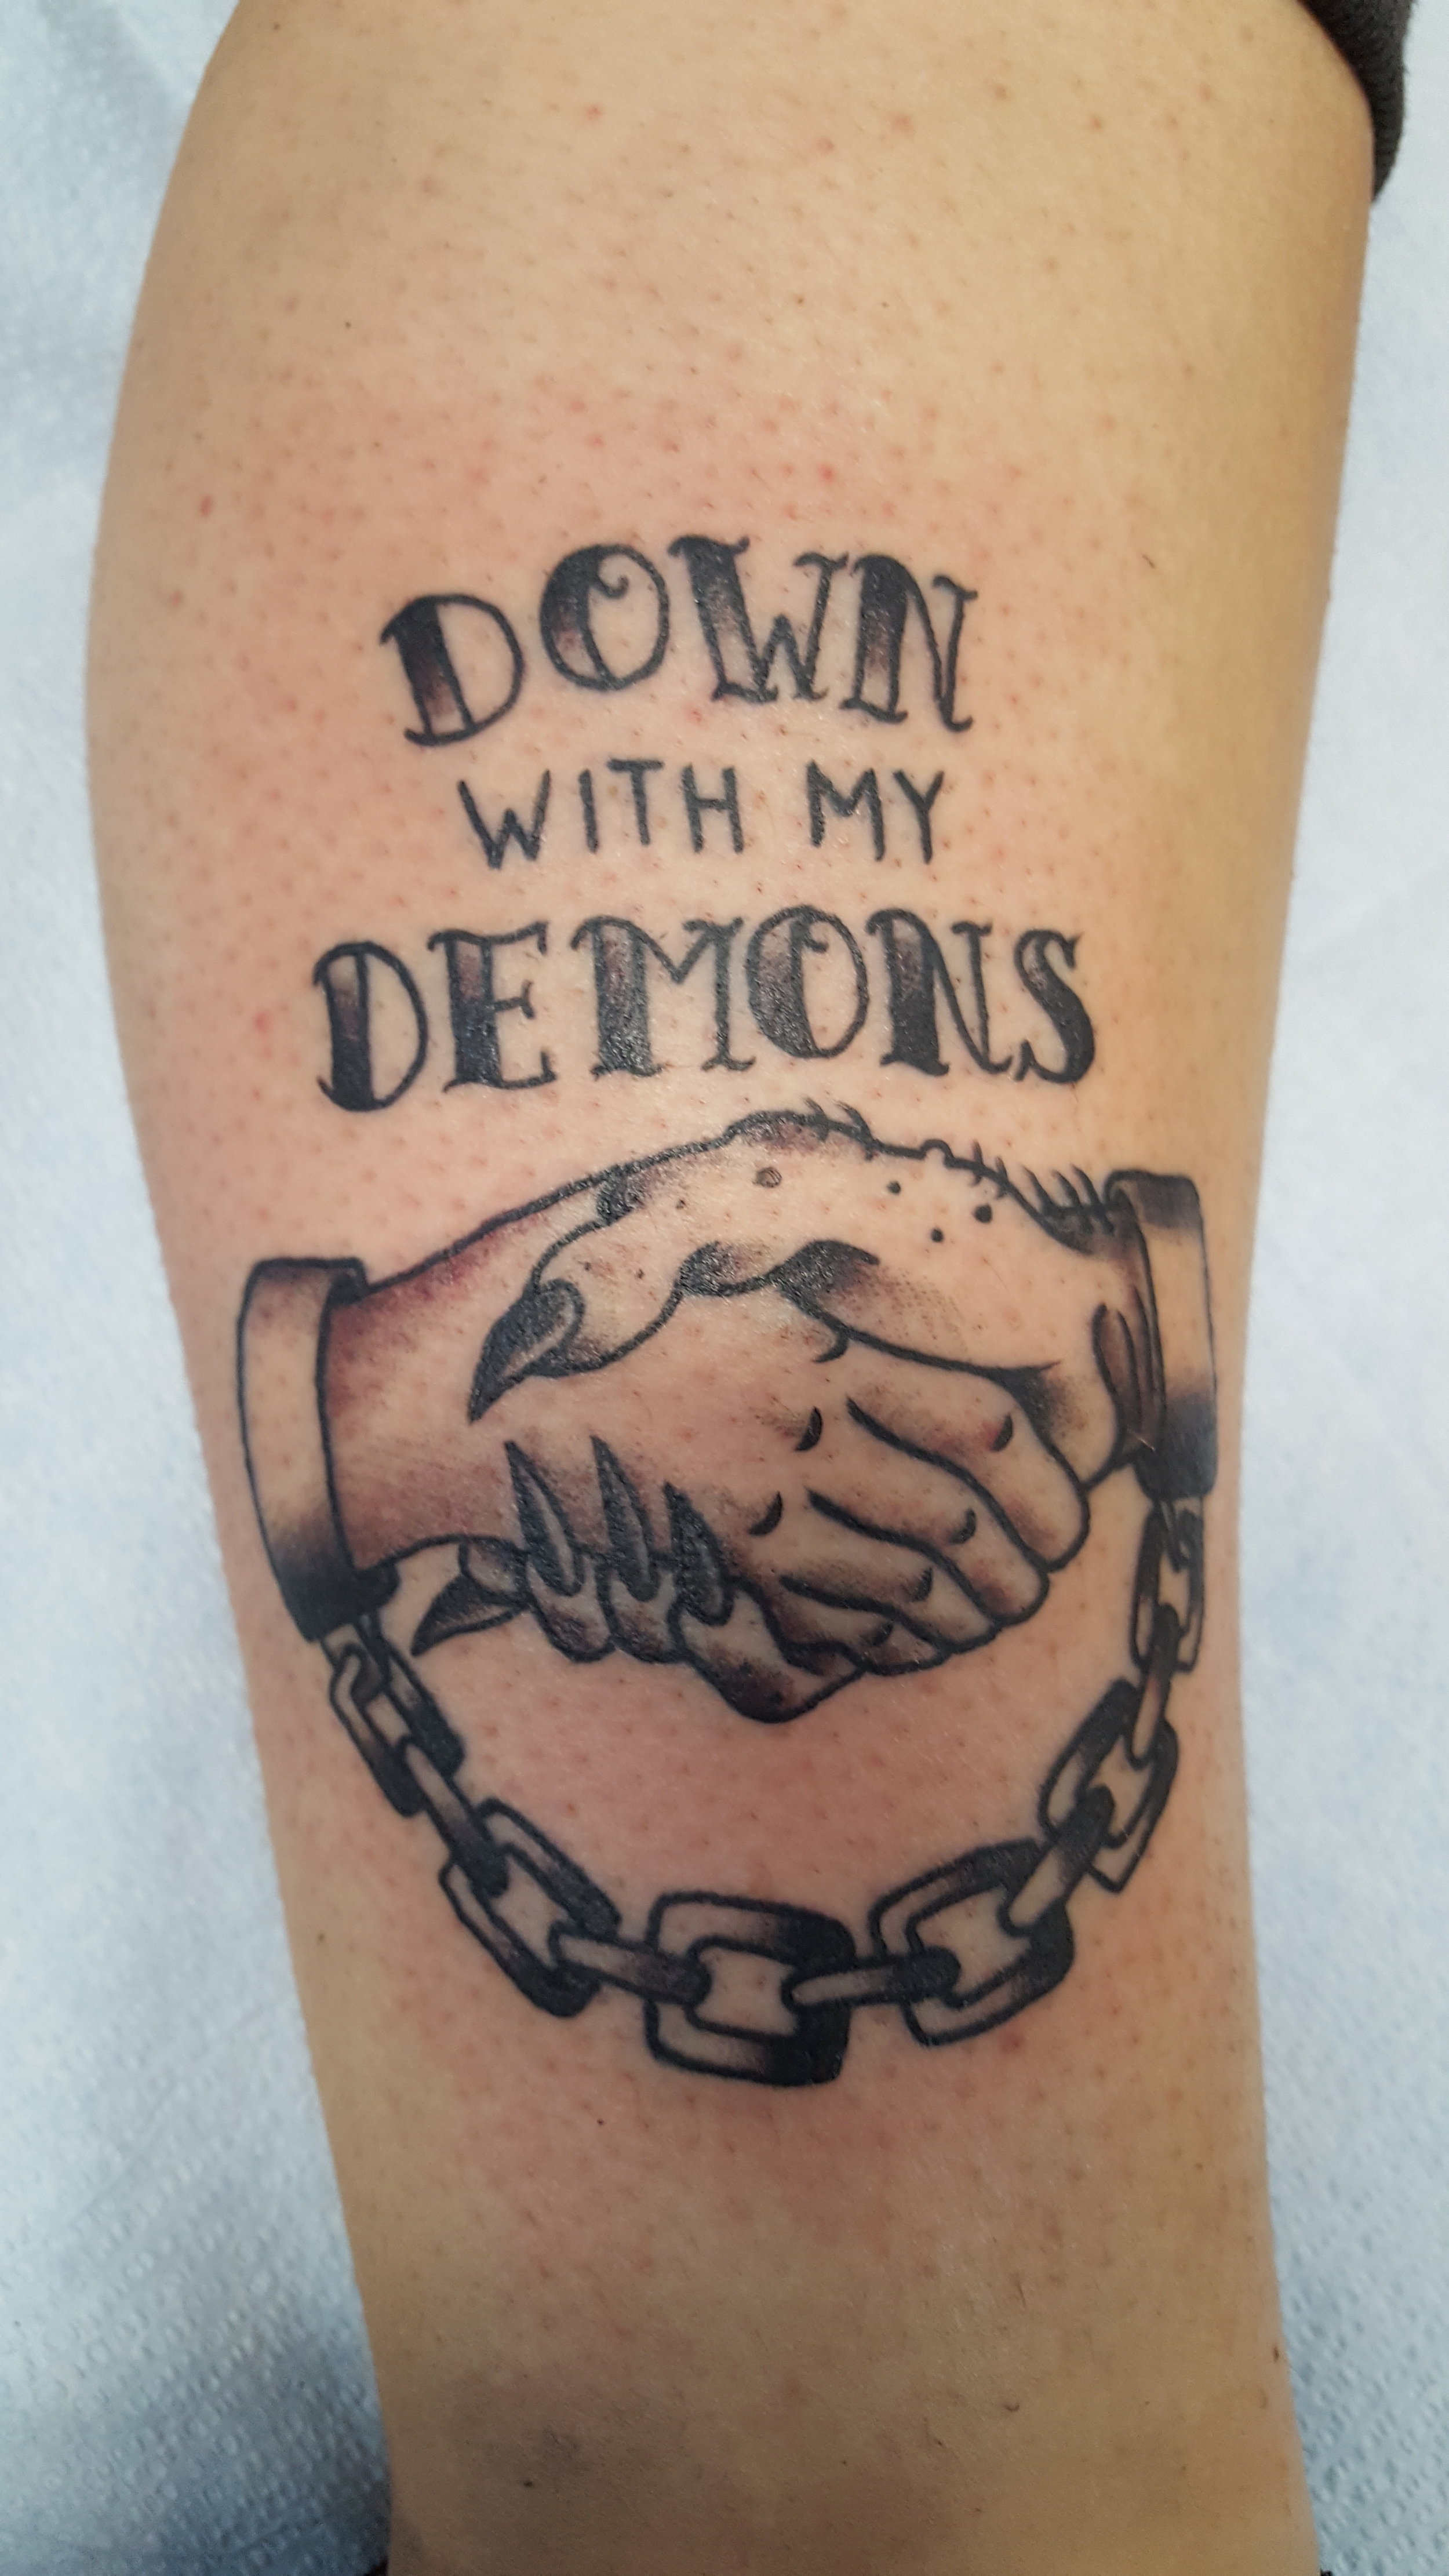 Down with my demons